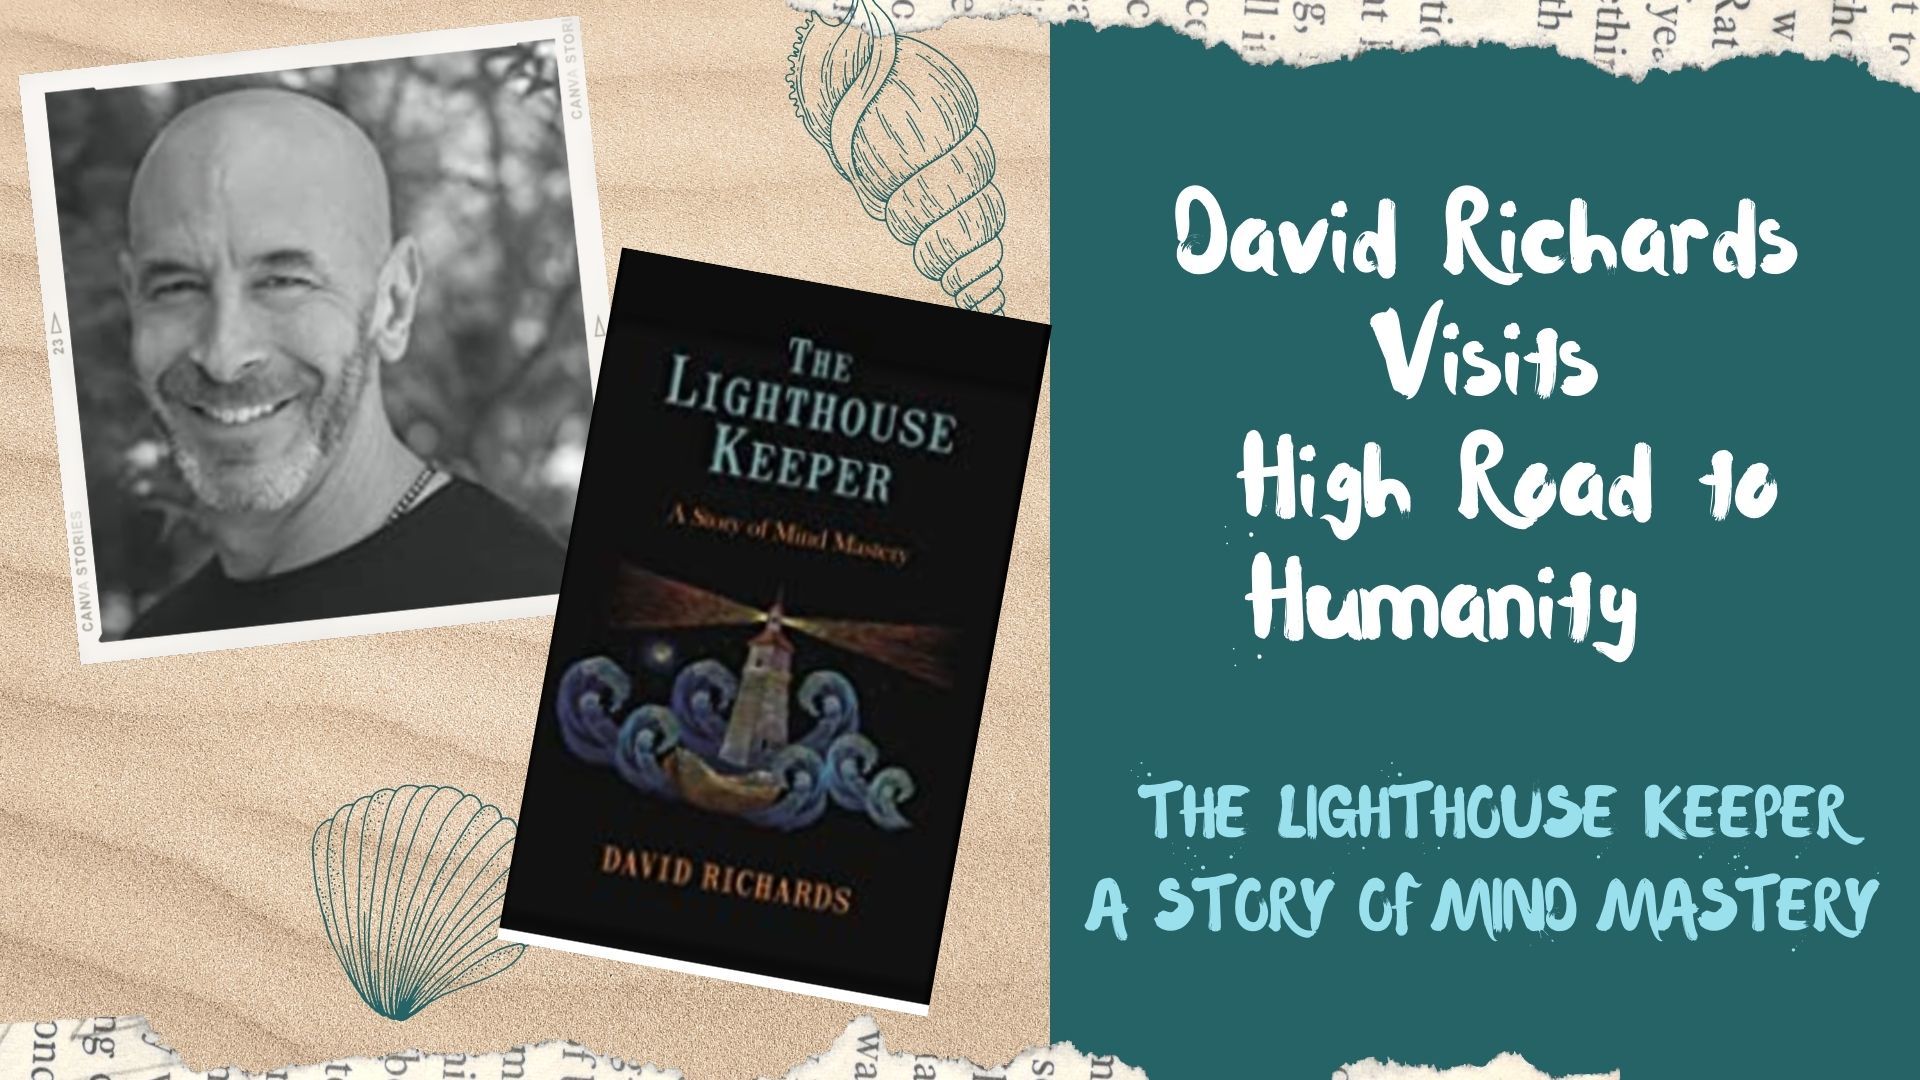 The Lighthouse Keeper with David Richards- A Story of Mind Mastery